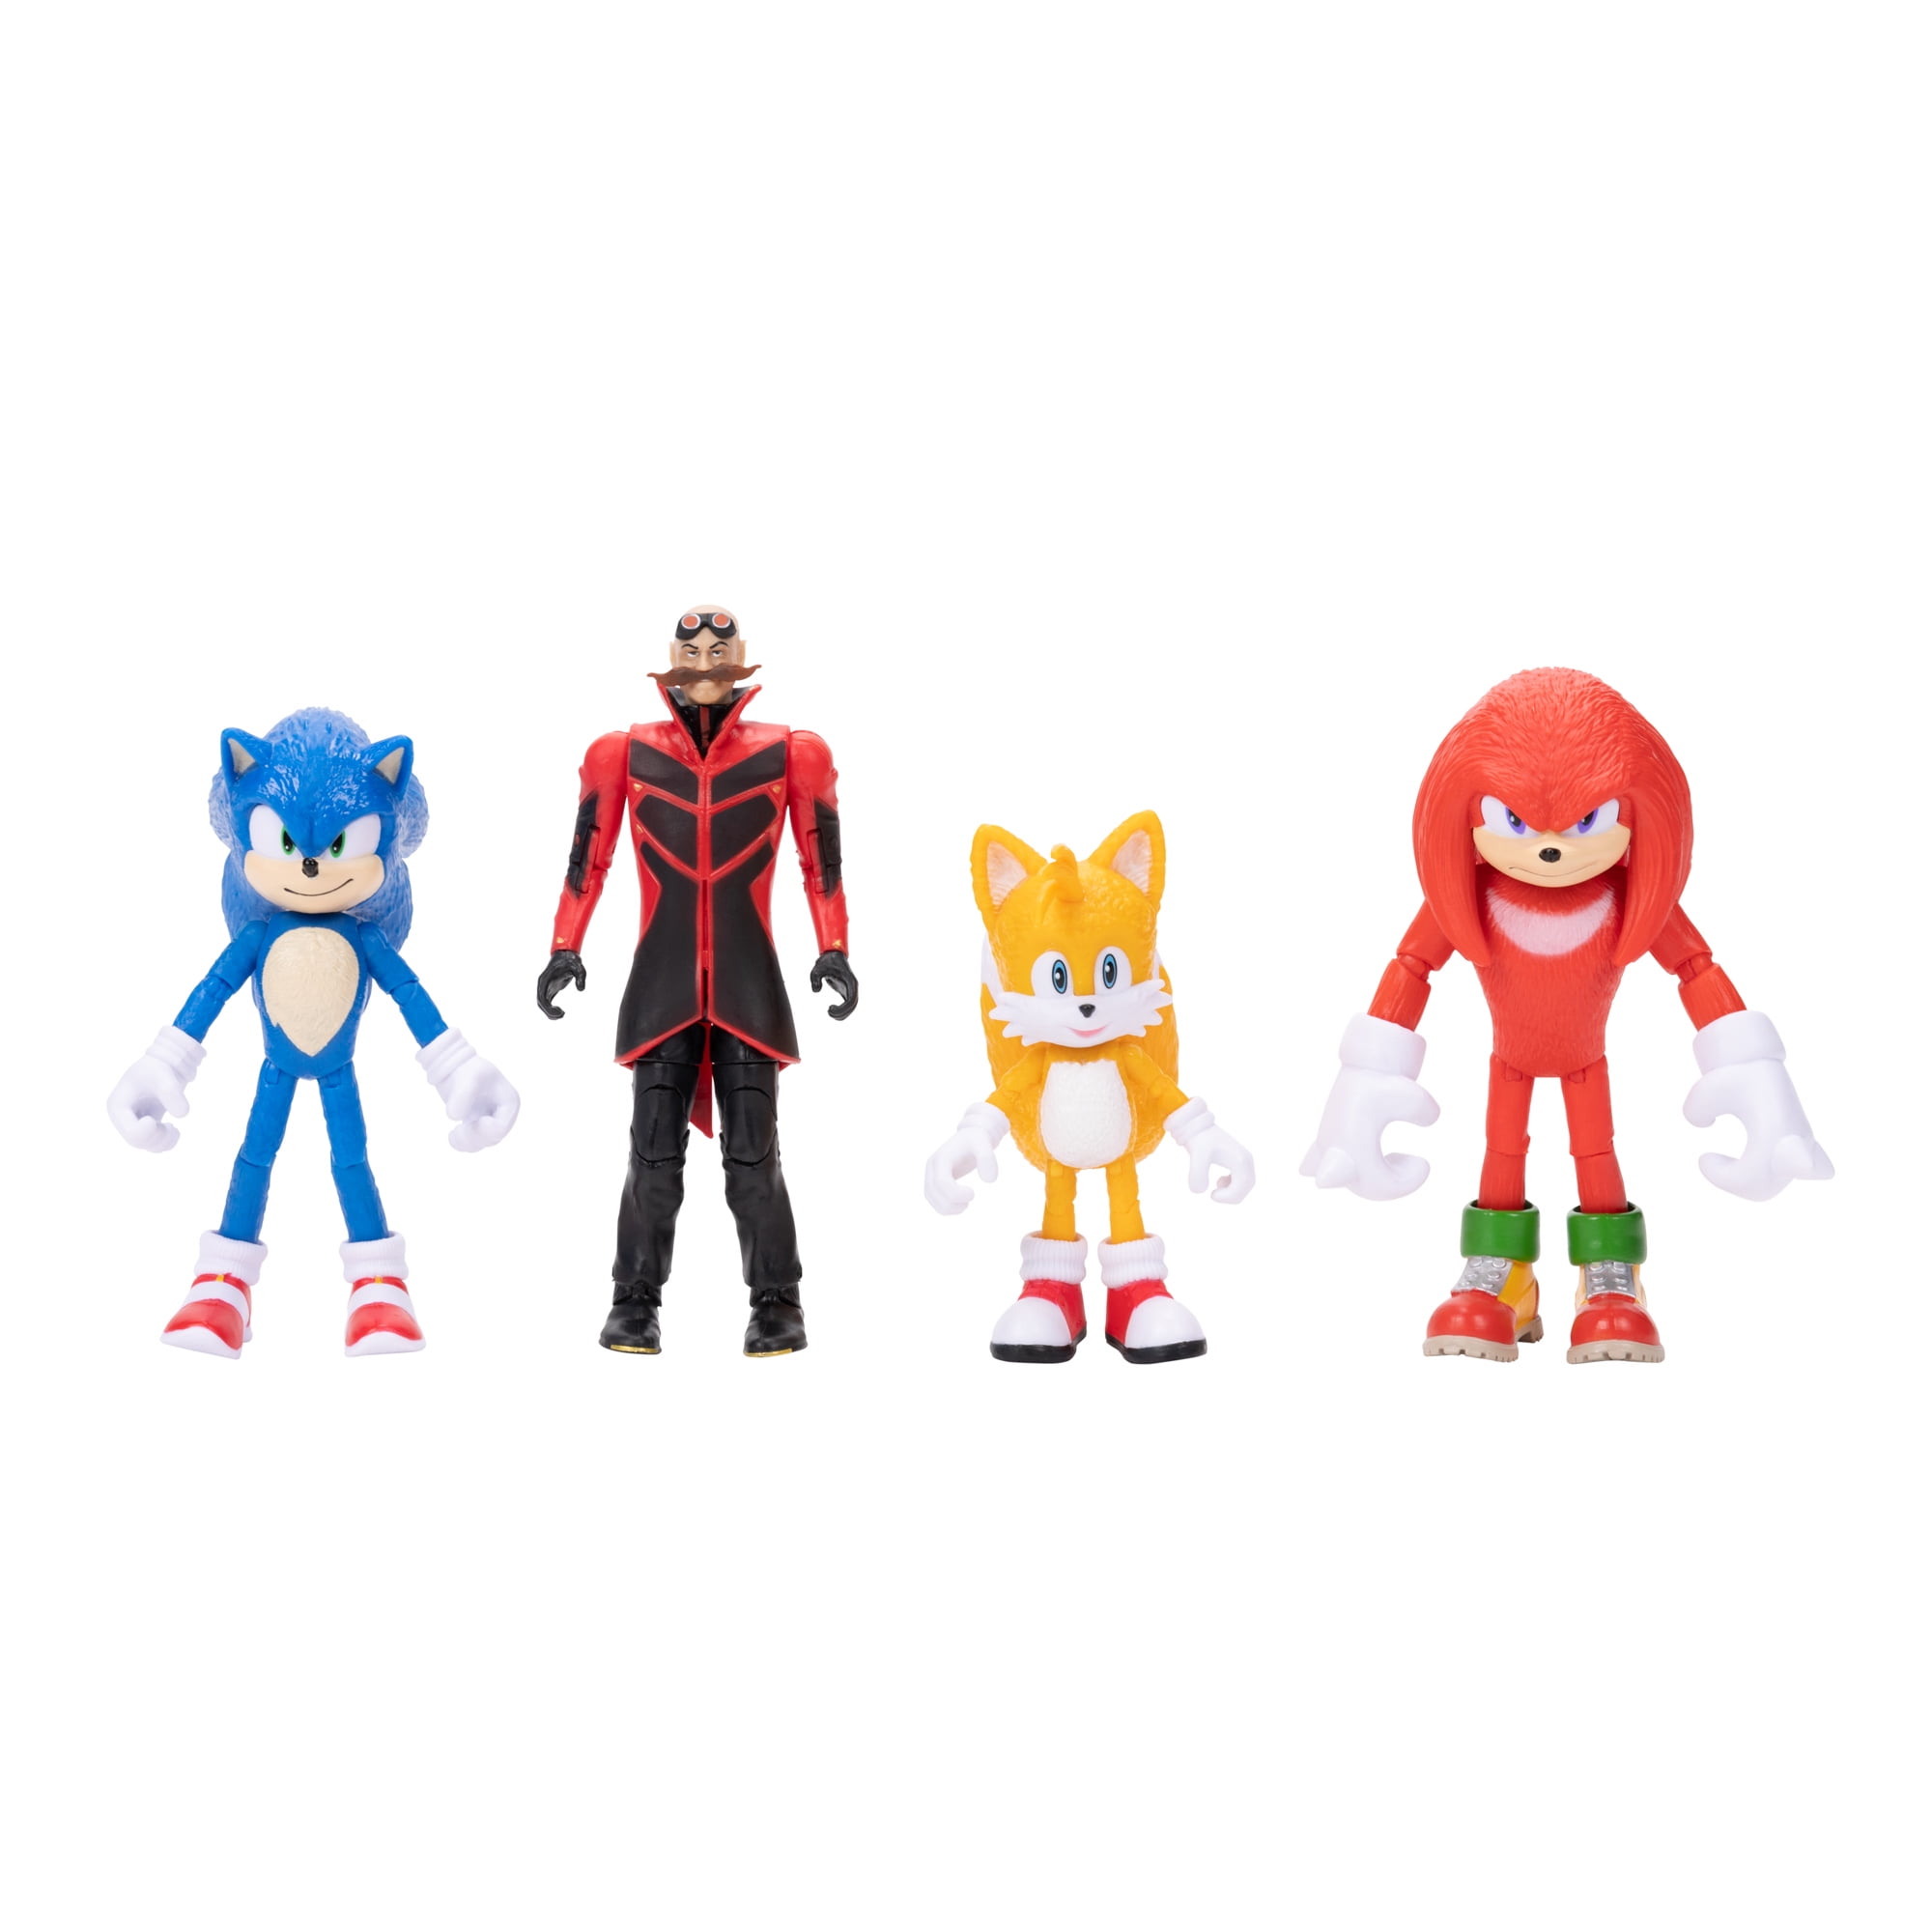 Sonic the Hedgehog - 4 inch Articulated Action Figures with Accessories Assortment Will Vary